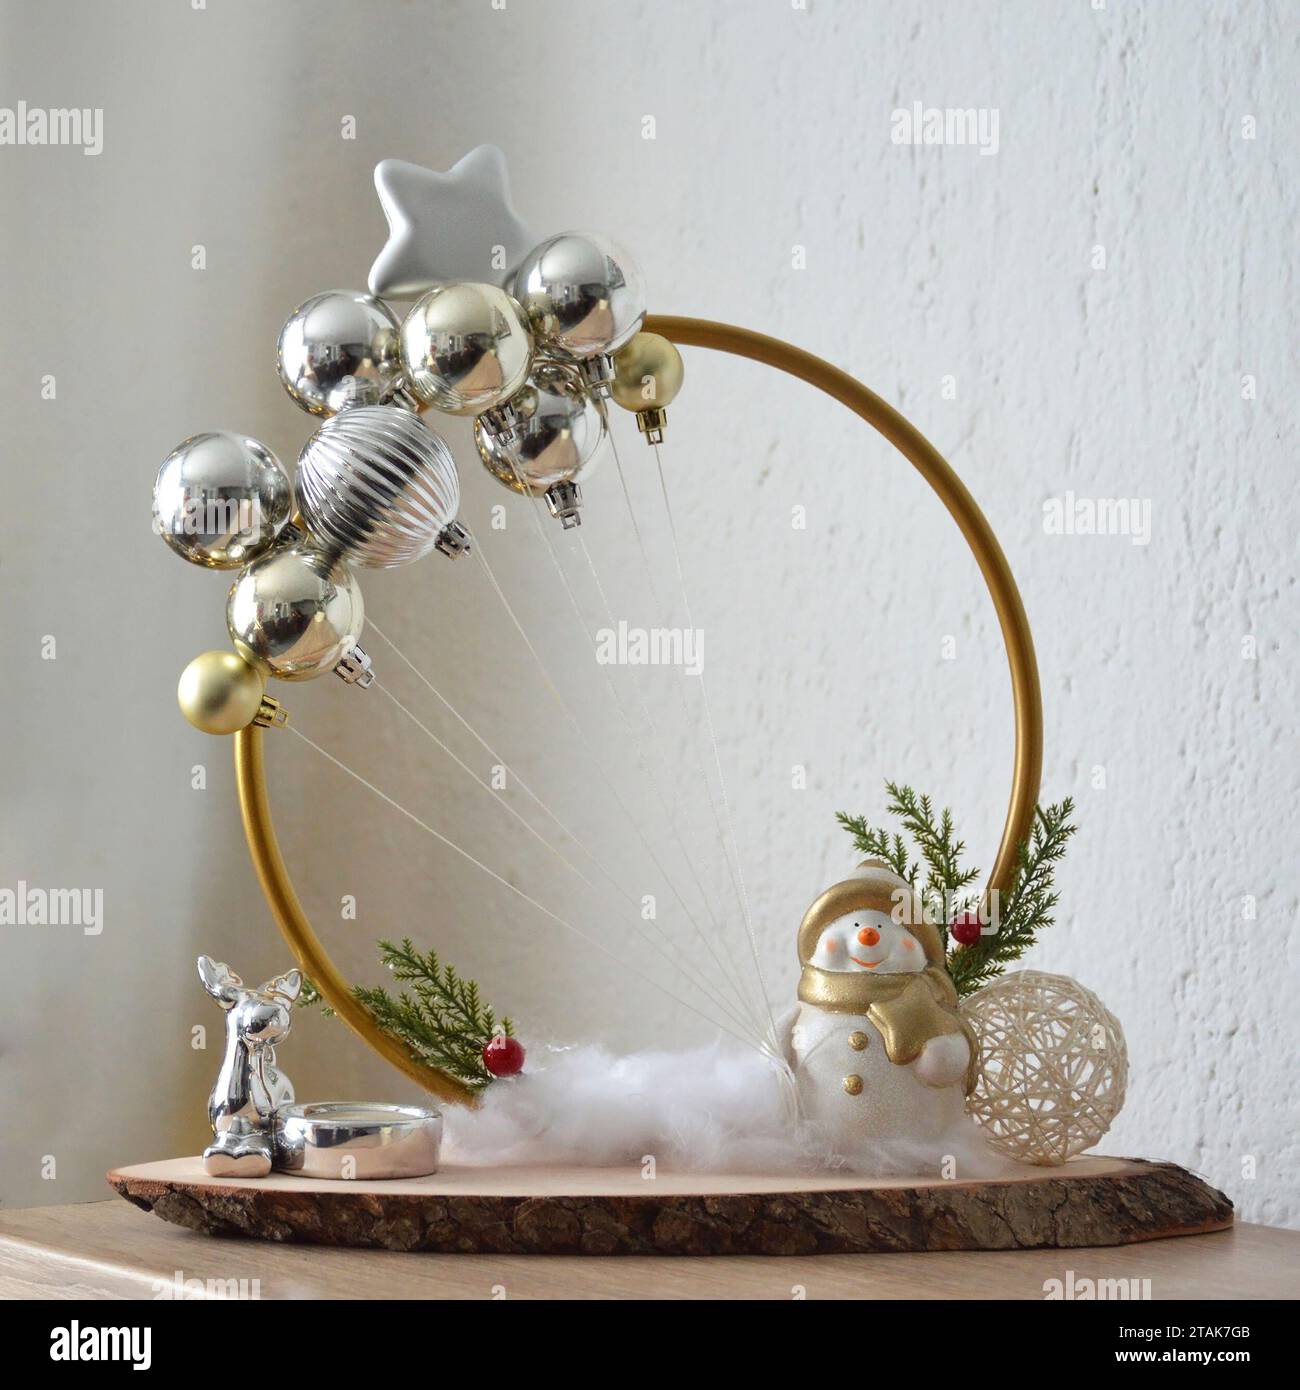 Hand-made Christmas decoration. Christmas craft concept. Snowman holding baubles as balloons. Stock Photo